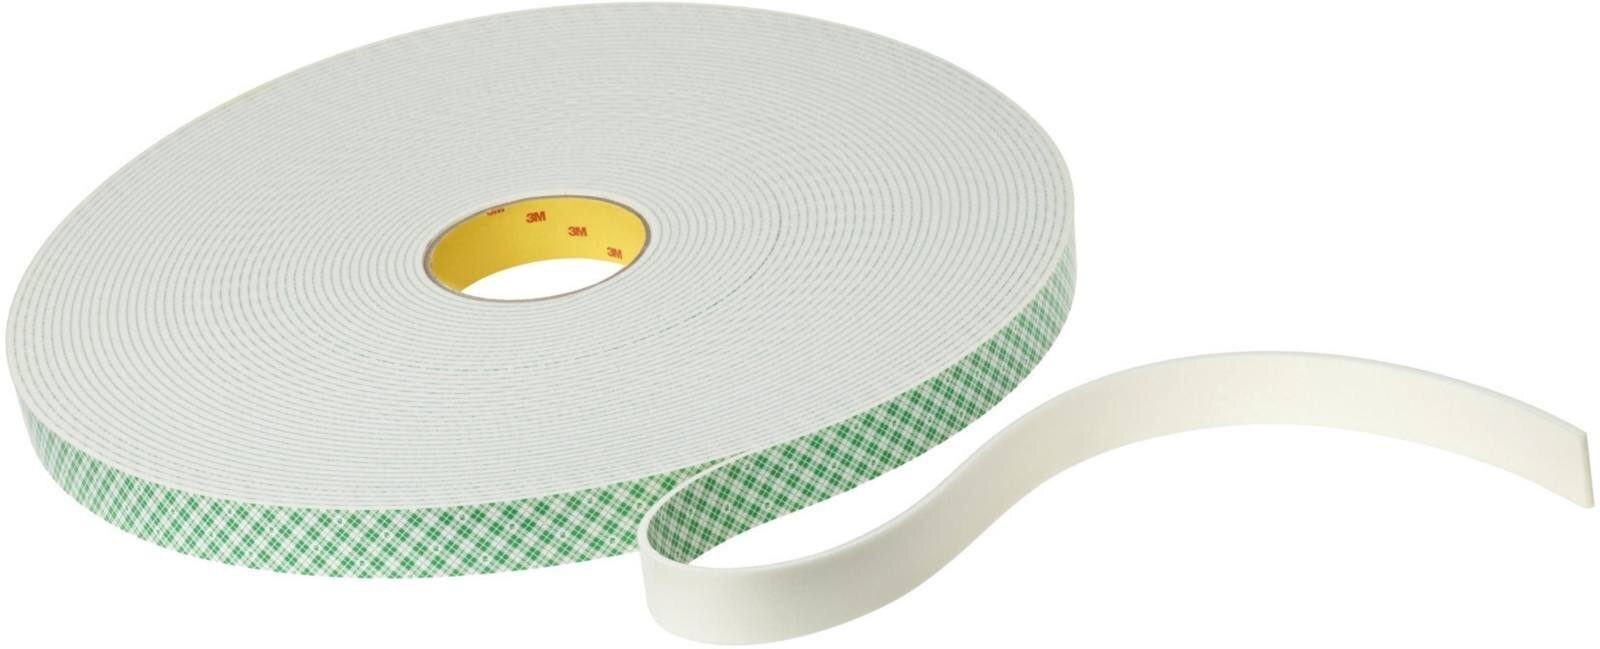 3M PU foam adhesive tape with acrylic adhesive 4008, beige, 25 mm x 33 m, 3.2 mm